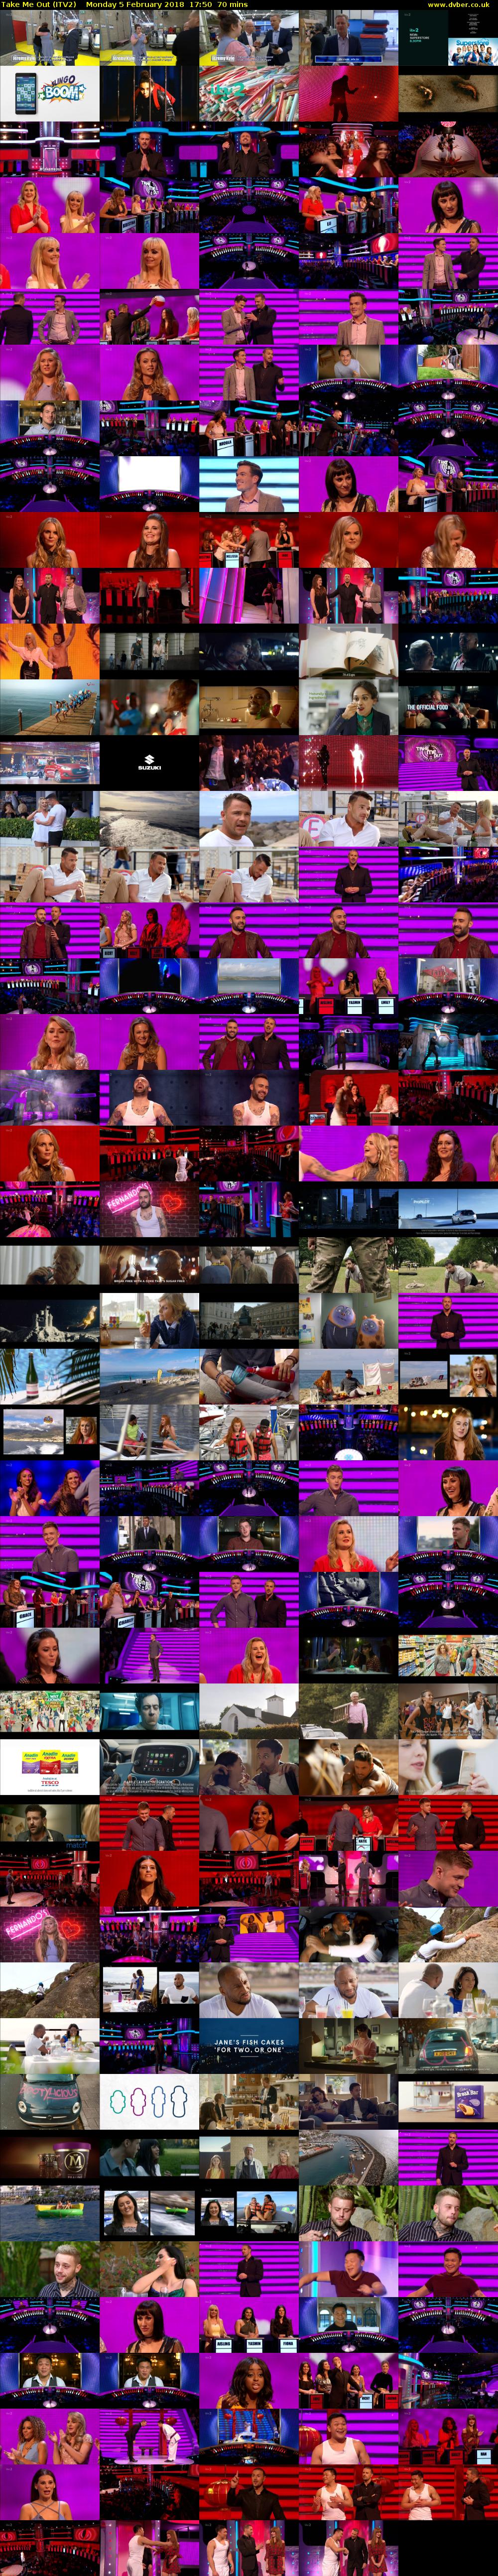 Take Me Out (ITV2) Monday 5 February 2018 17:50 - 19:00